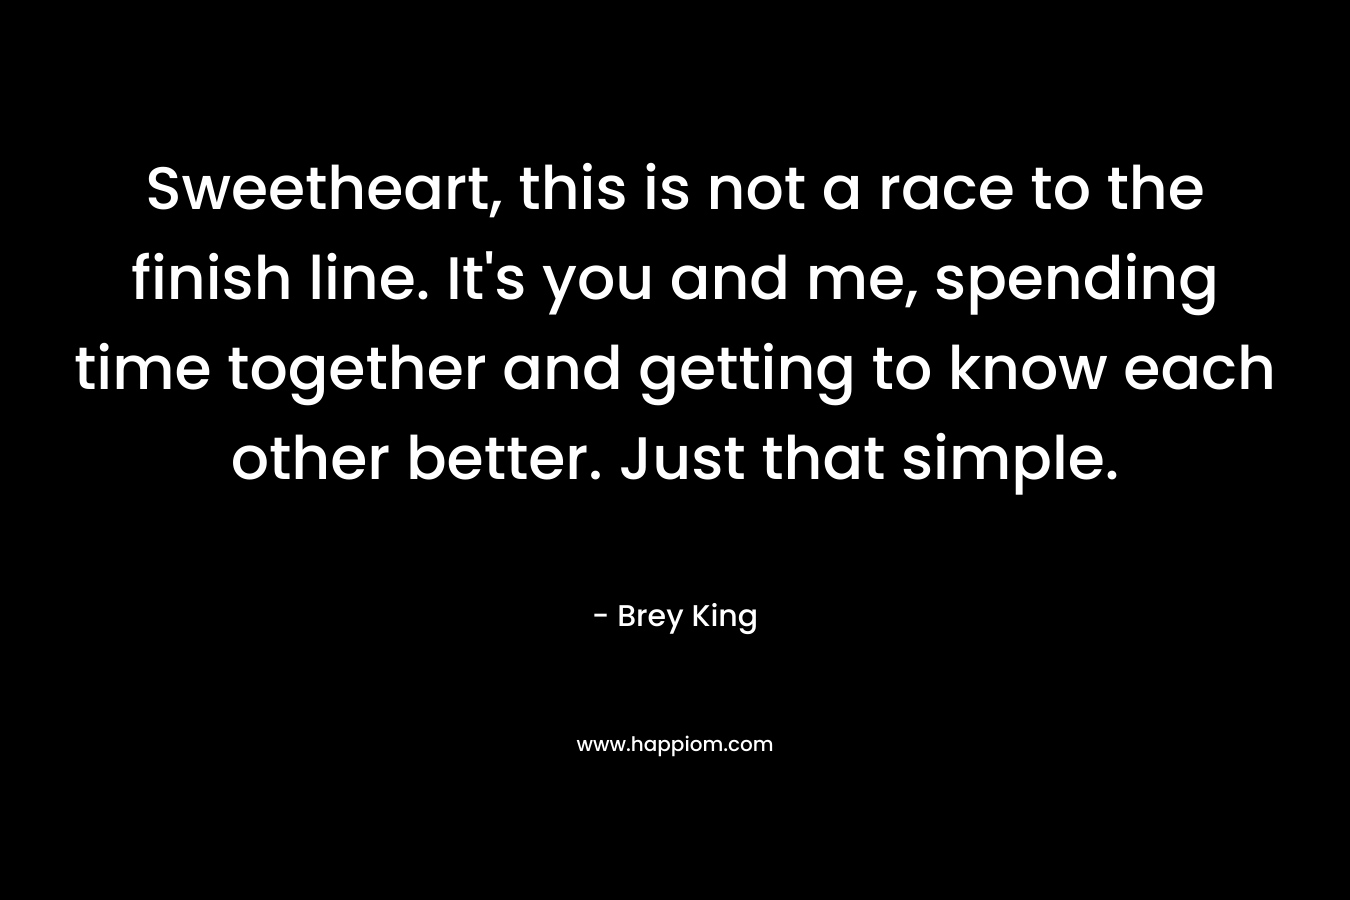 Sweetheart, this is not a race to the finish line. It's you and me, spending time together and getting to know each other better. Just that simple.